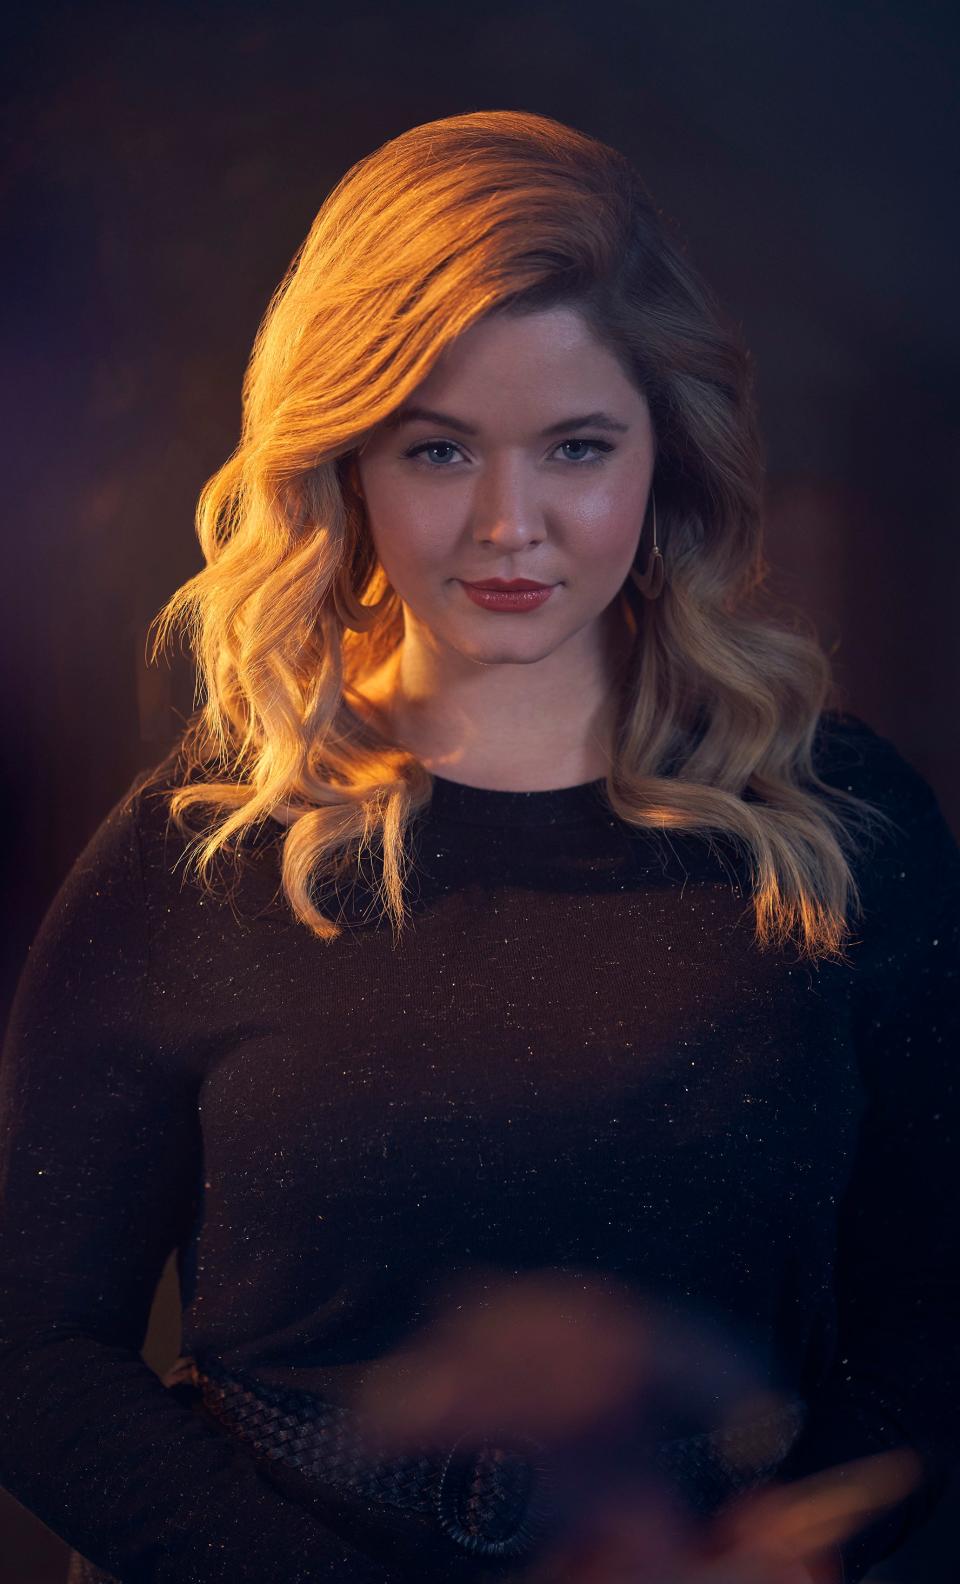 Sasha Pieterse poses in a dark, long-sleeved outfit, looking directly at the camera with a slight smile